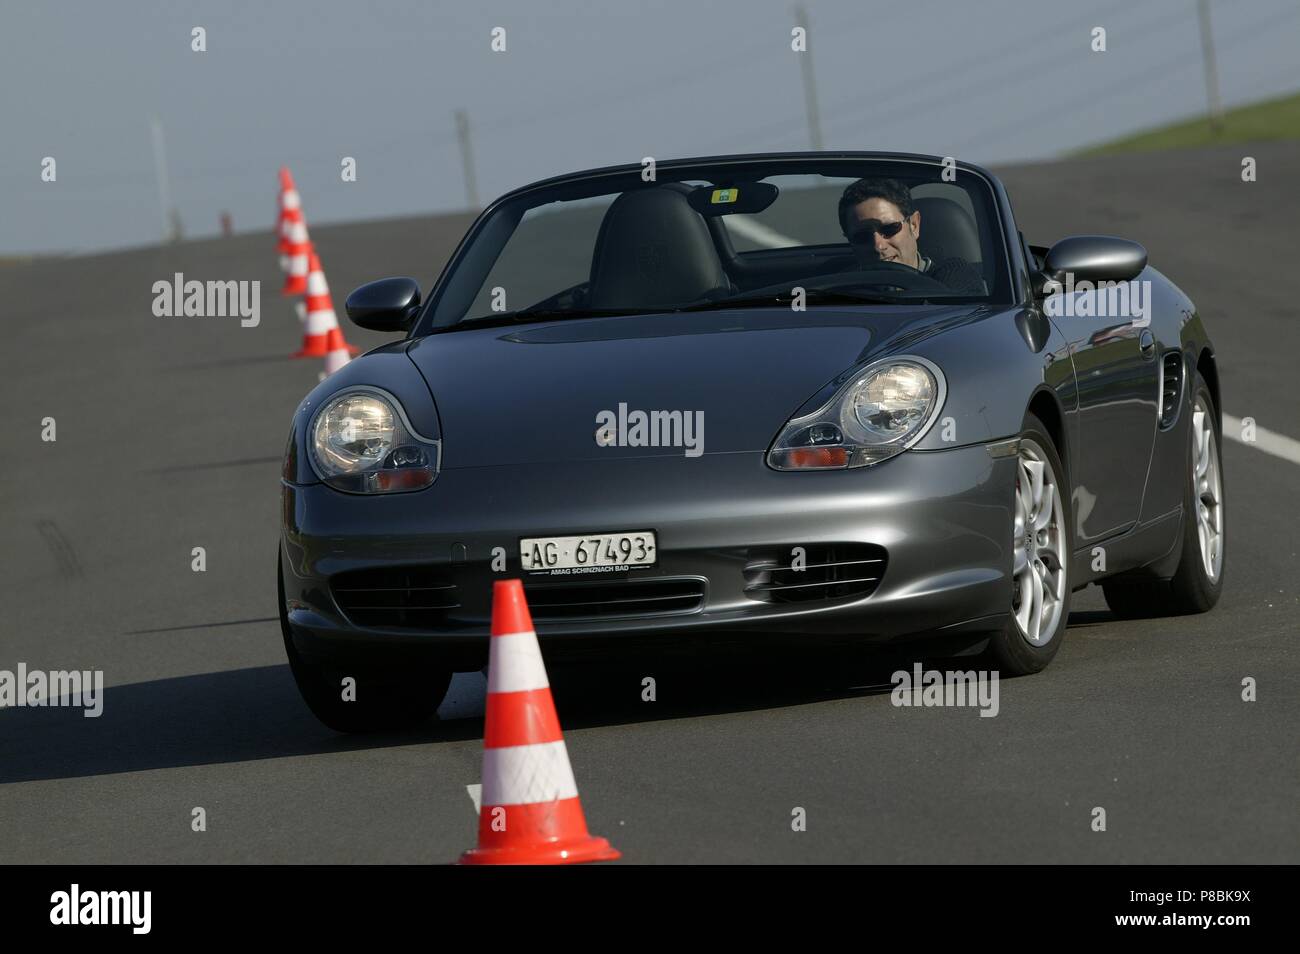 Porsche boxster S 2003 Model year - in silver metallic high speed cornering showing front view Stock Photo